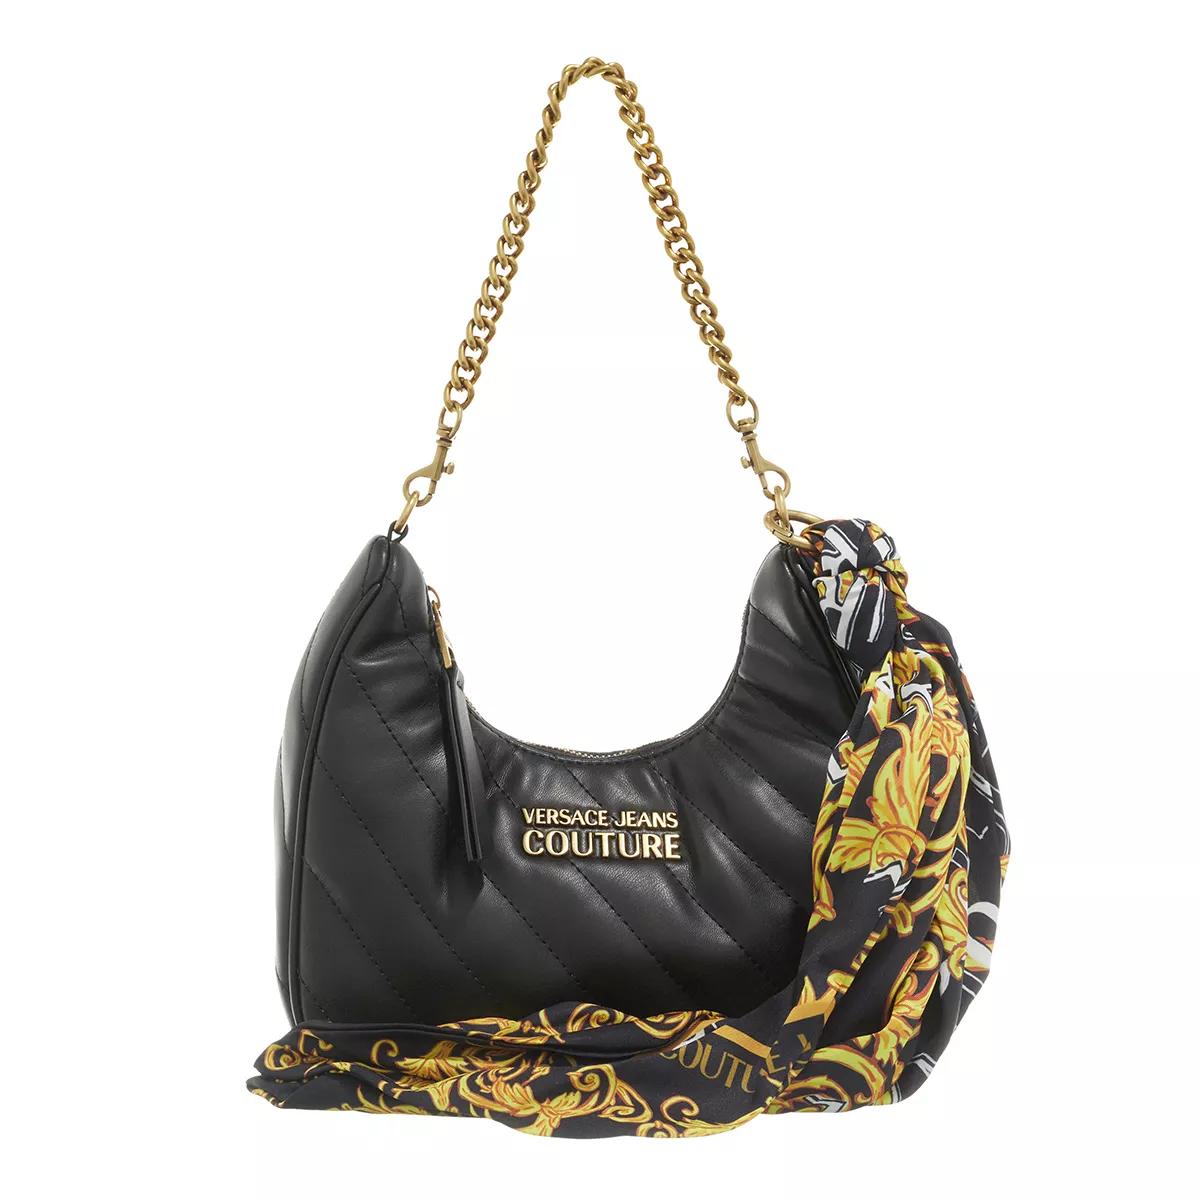 Versace Jeans Couture Range A - Thelma Soft Black | Hobo Bag